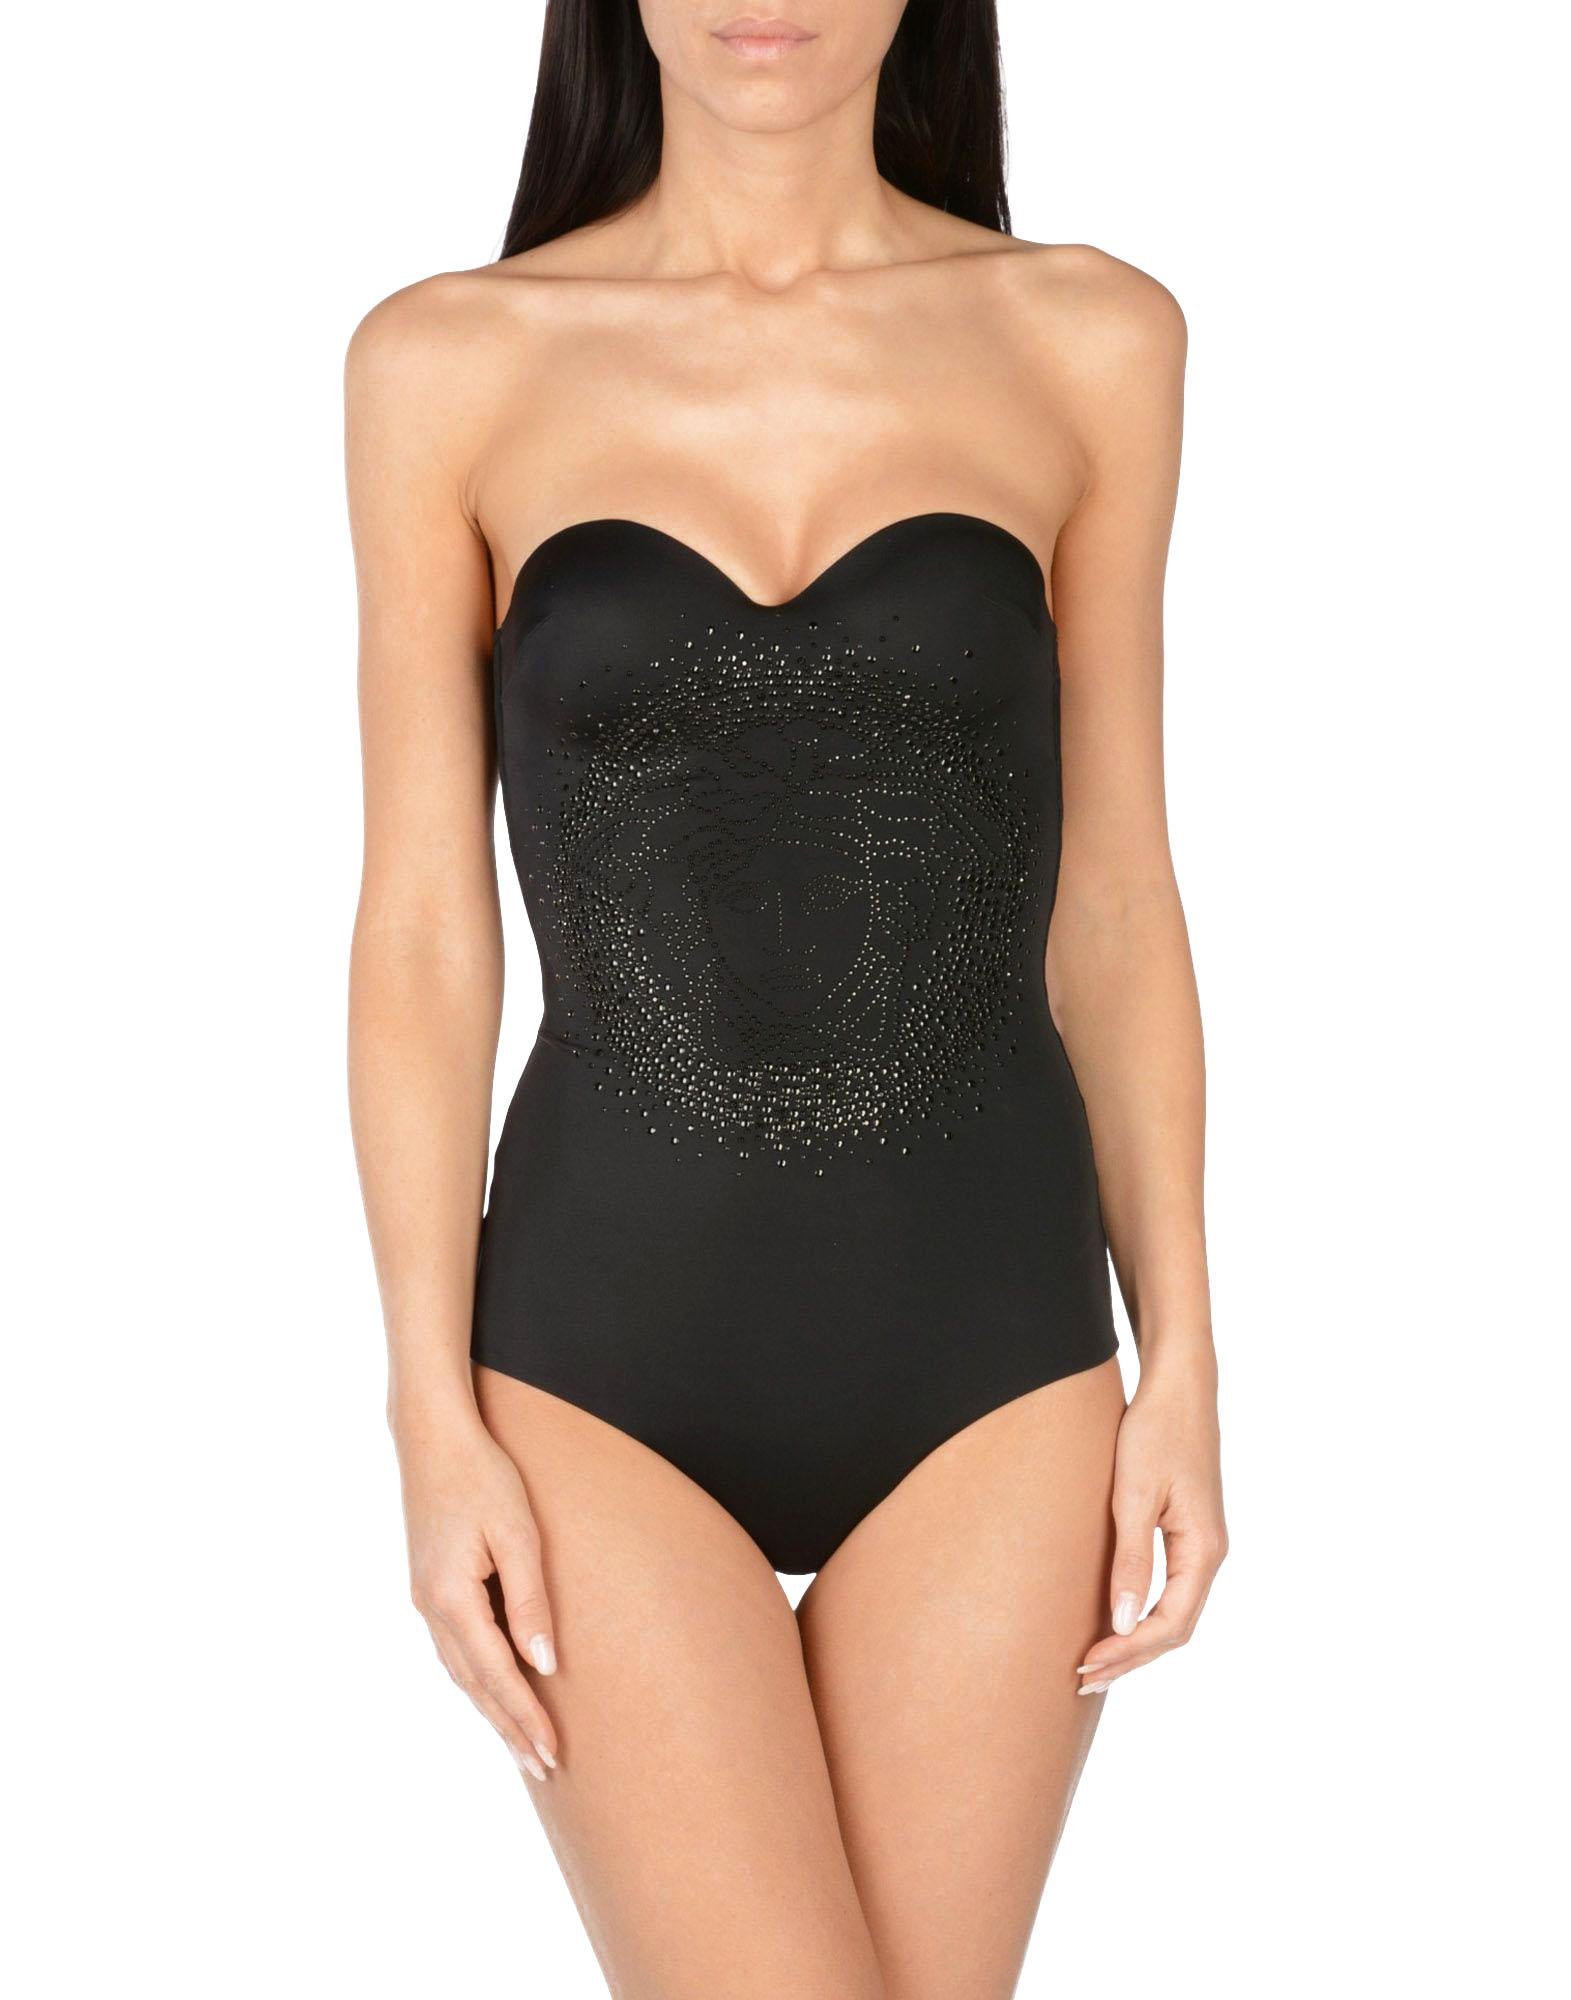 New Versace Black Jersey Embellished Medusa Swimsuit
Designer sizes available - 1,2,4.
Round dipped cup, Sculptured one piece swimsuit with detachable halter-neck and embellished central Medusa Head, Stretch Jersey, Fully Lined.
Made in Italy
New